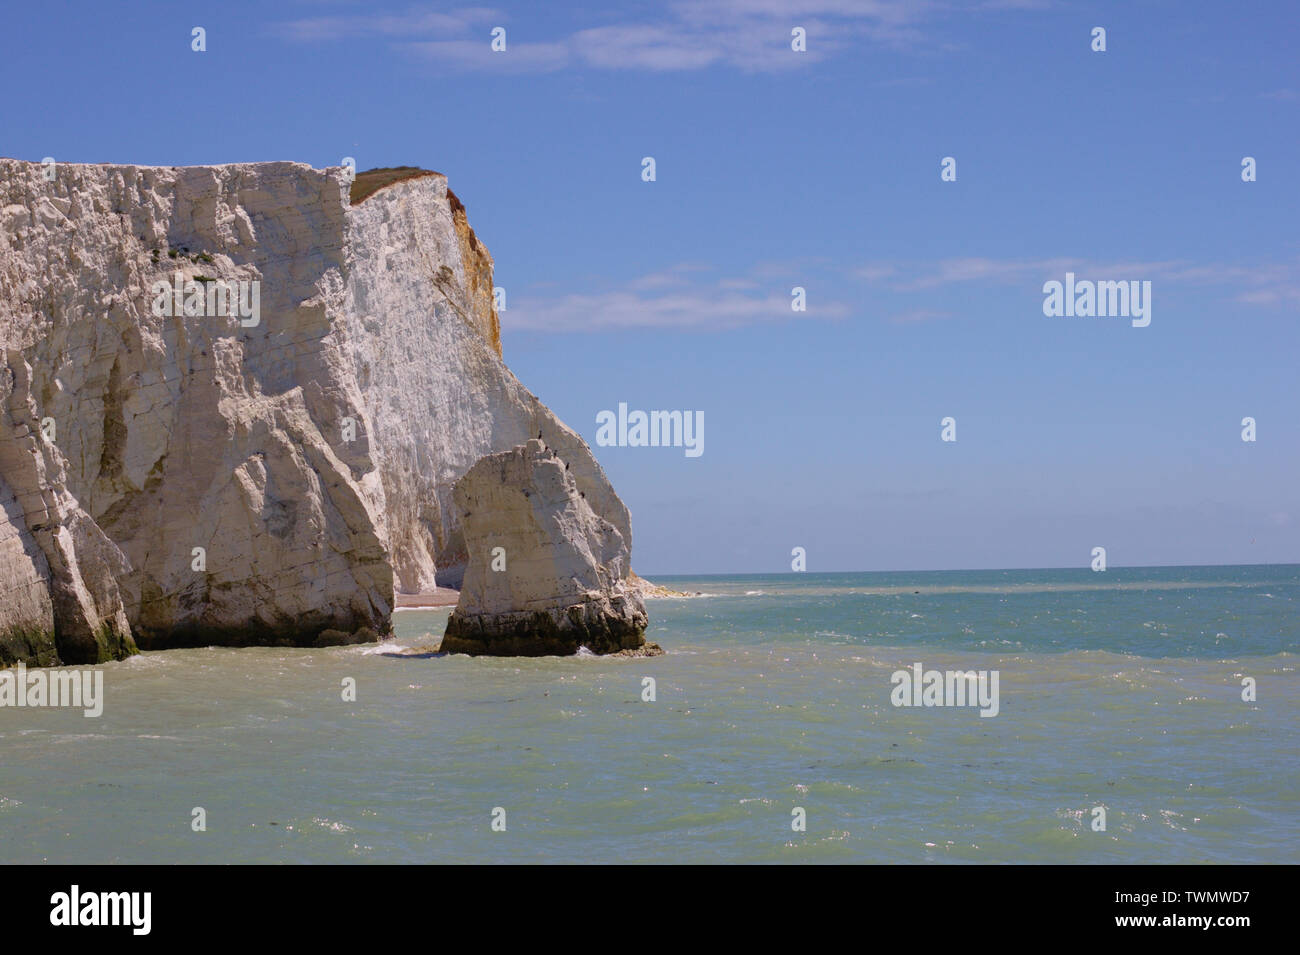 White cliffs Seven Sisters at the beach of Seaford, East Sussex, UK. Clear day. Stock Photo